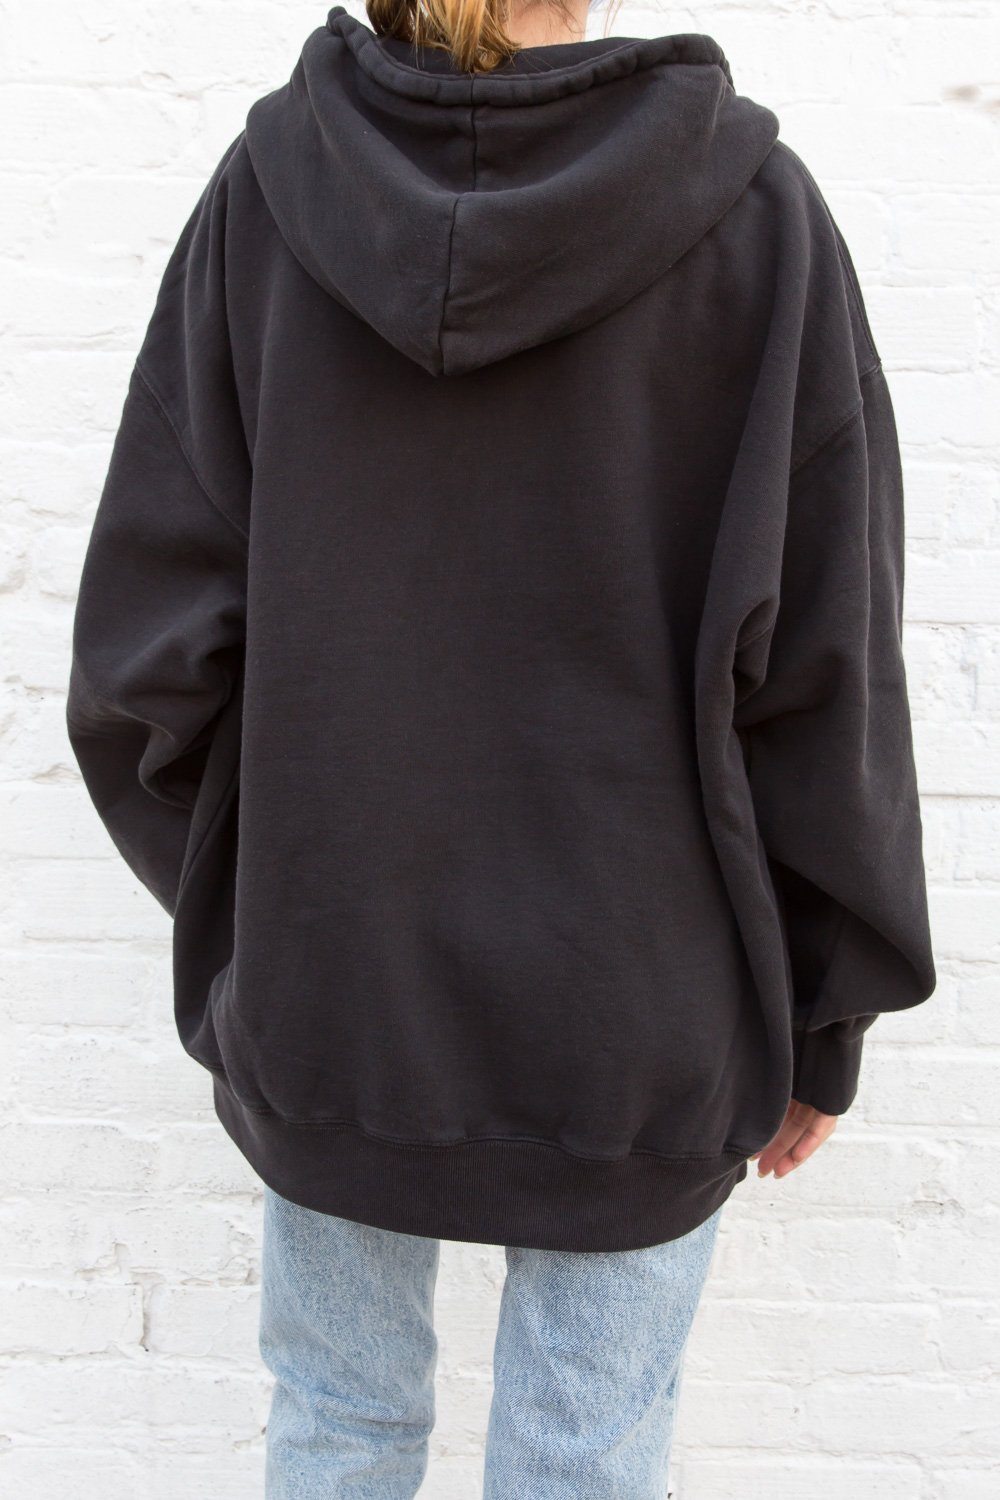 Brandy Melville Brown Oversized L/XL Christy zip up hoodie NWT